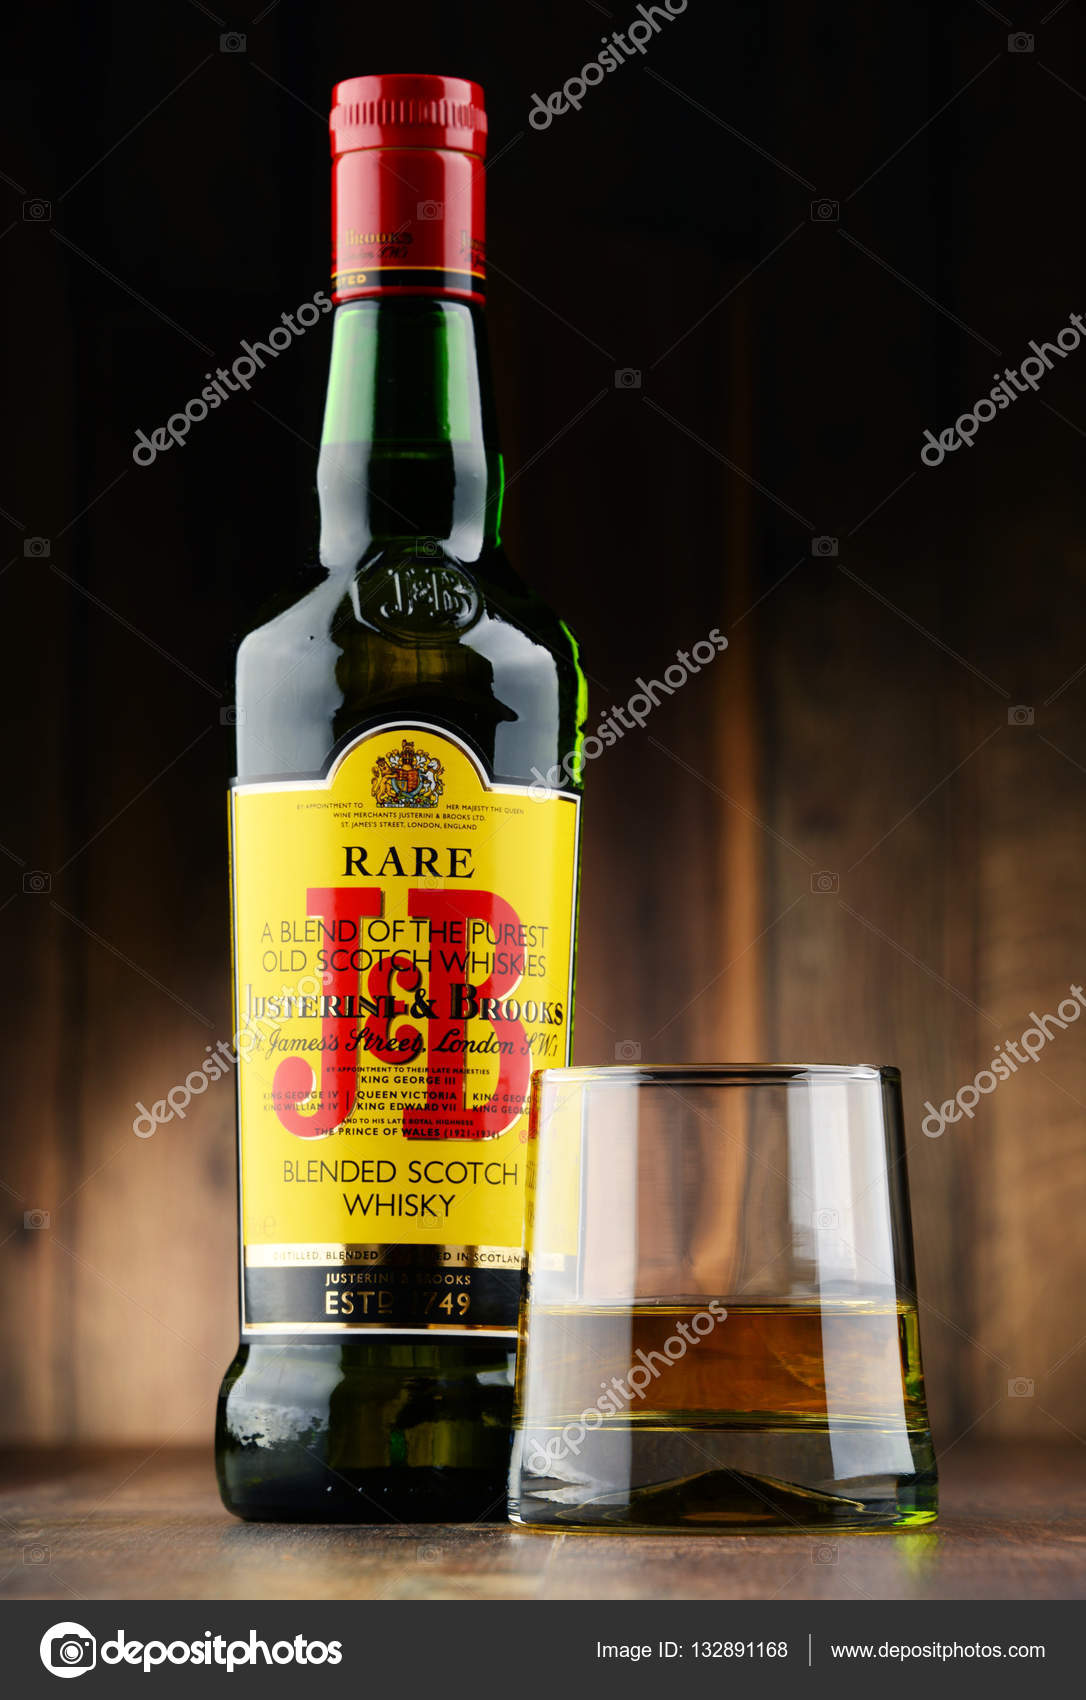 Bottle of J&B Rare blended Scotch whisky – Stock Editorial Photo ©  monticello #132891168